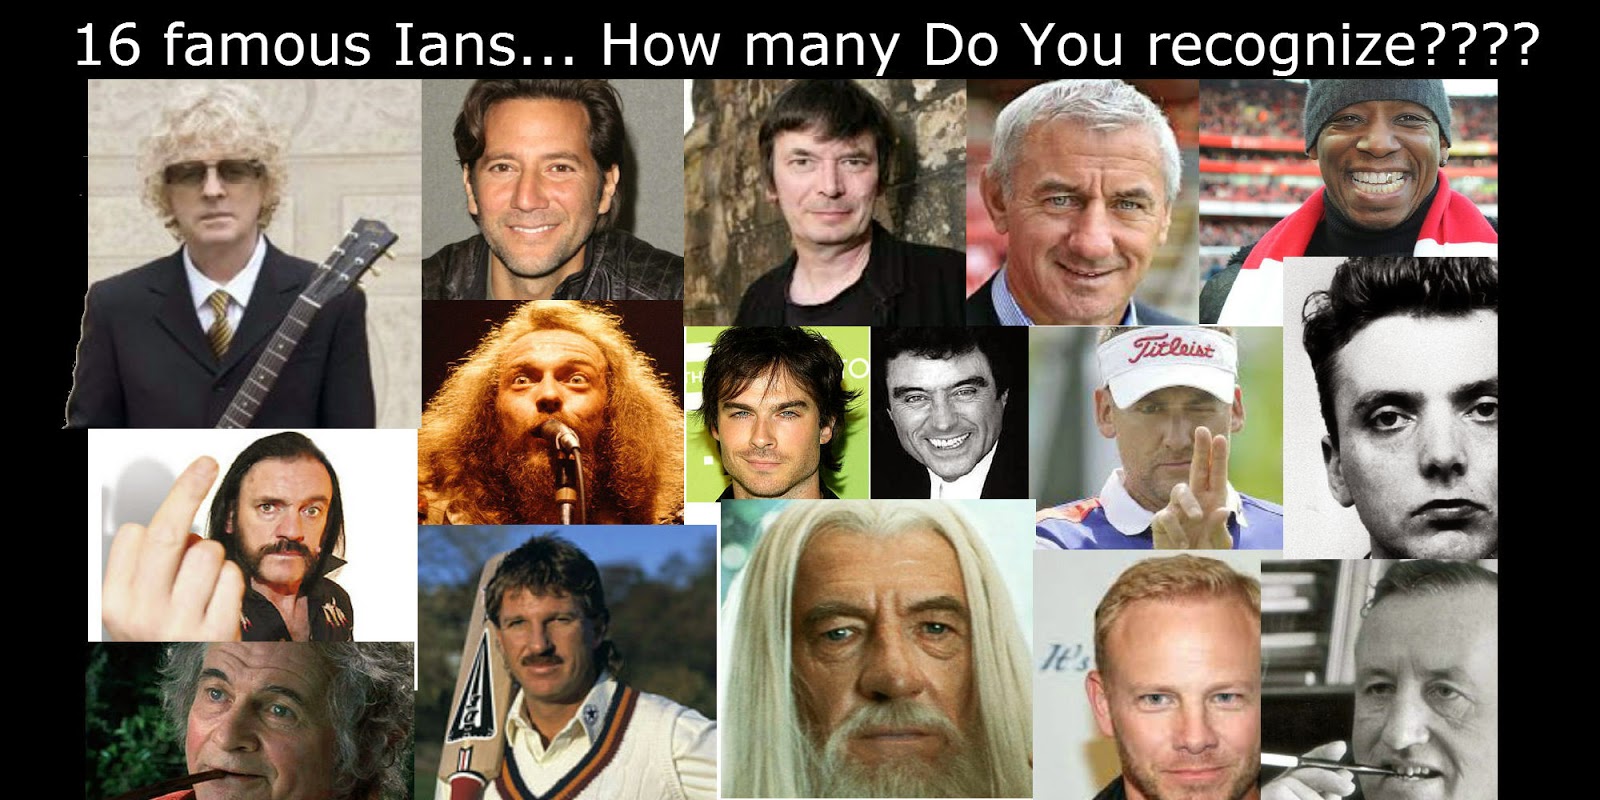 Ian Hall (Author) Top 16 Most Famous Ians; Who's Your Favorite?